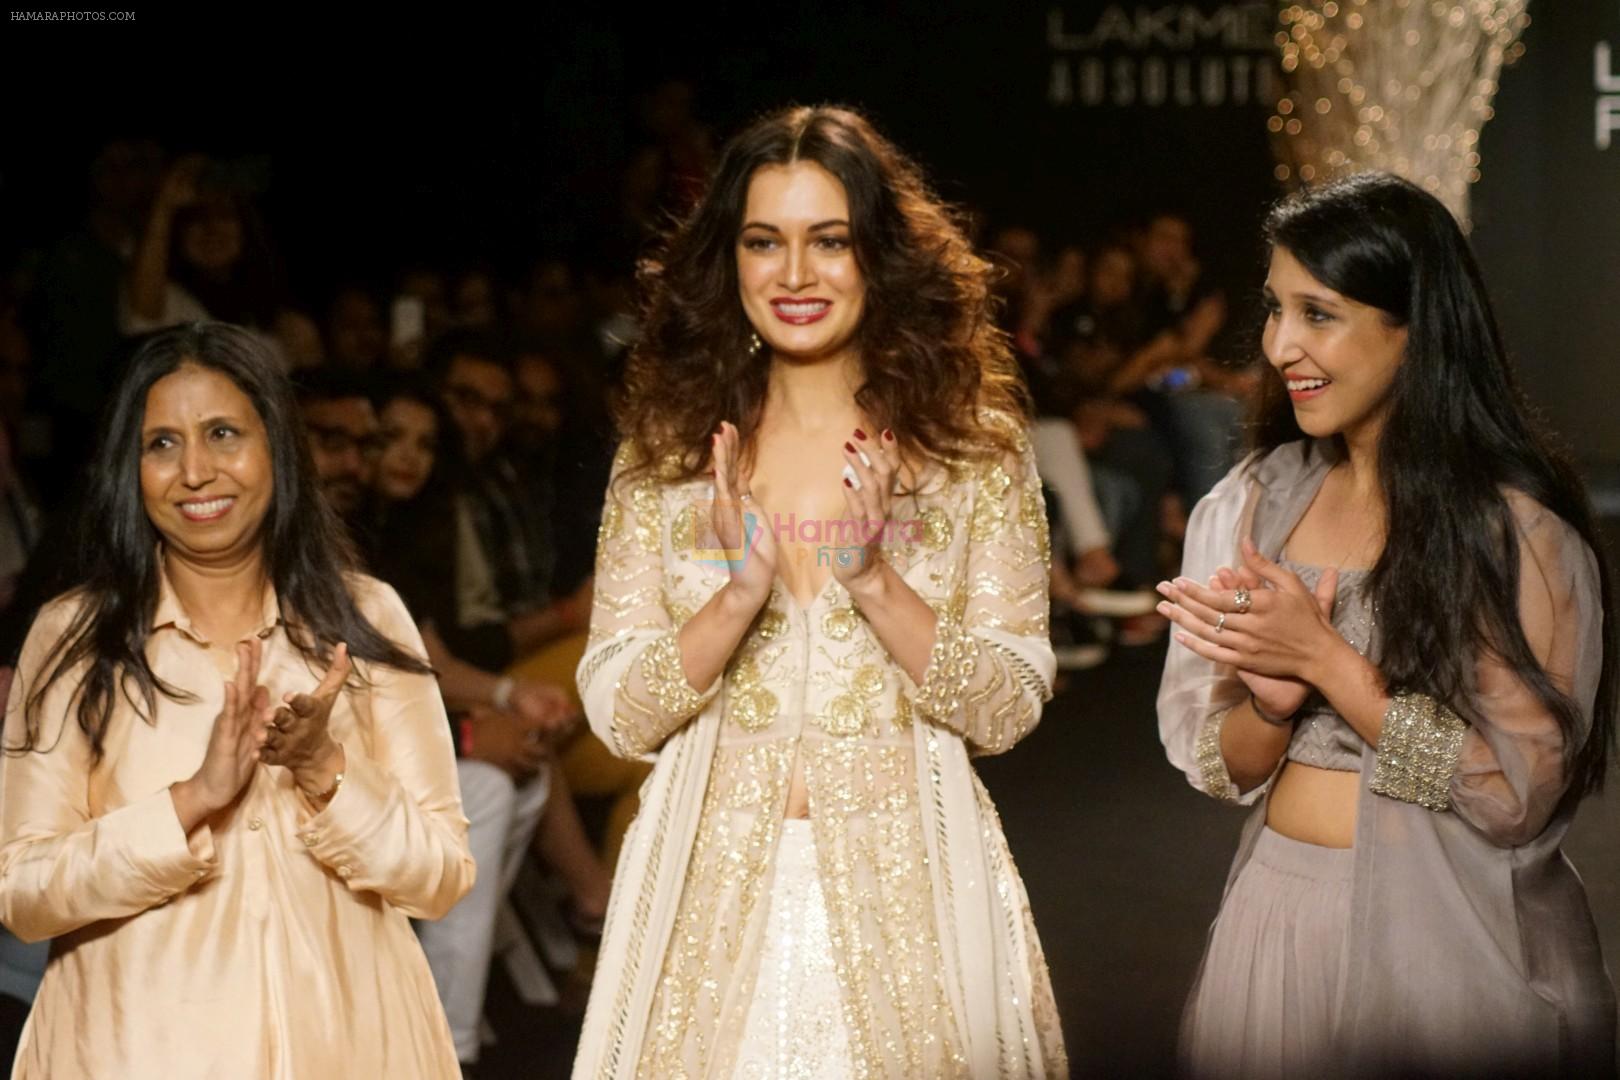 Dia Mirza Walks Ramp For Faabiina At LFW Winter Festive 2017 on 20th Aug 2017